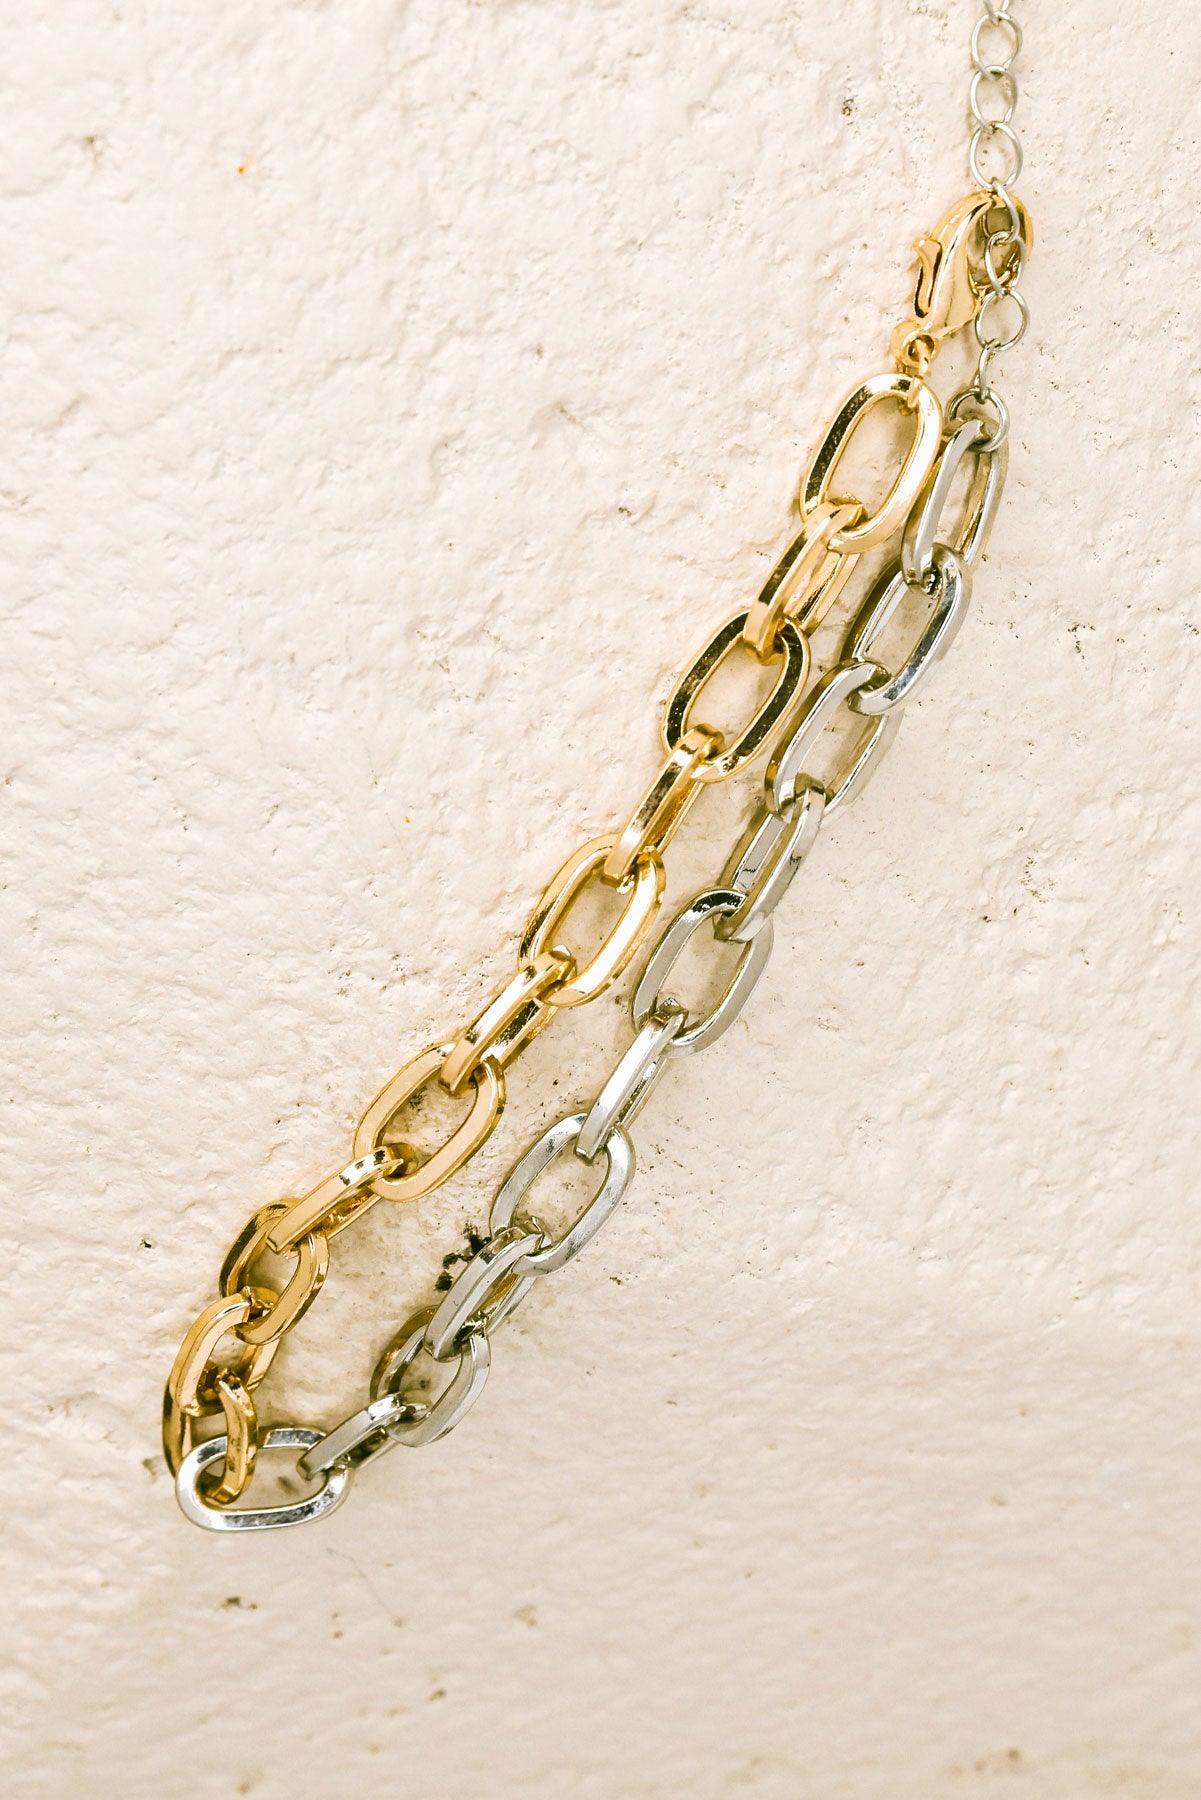 Two Tone Gold & Silver Cable Chain Link Anklet - Tasha Apparel Wholesale